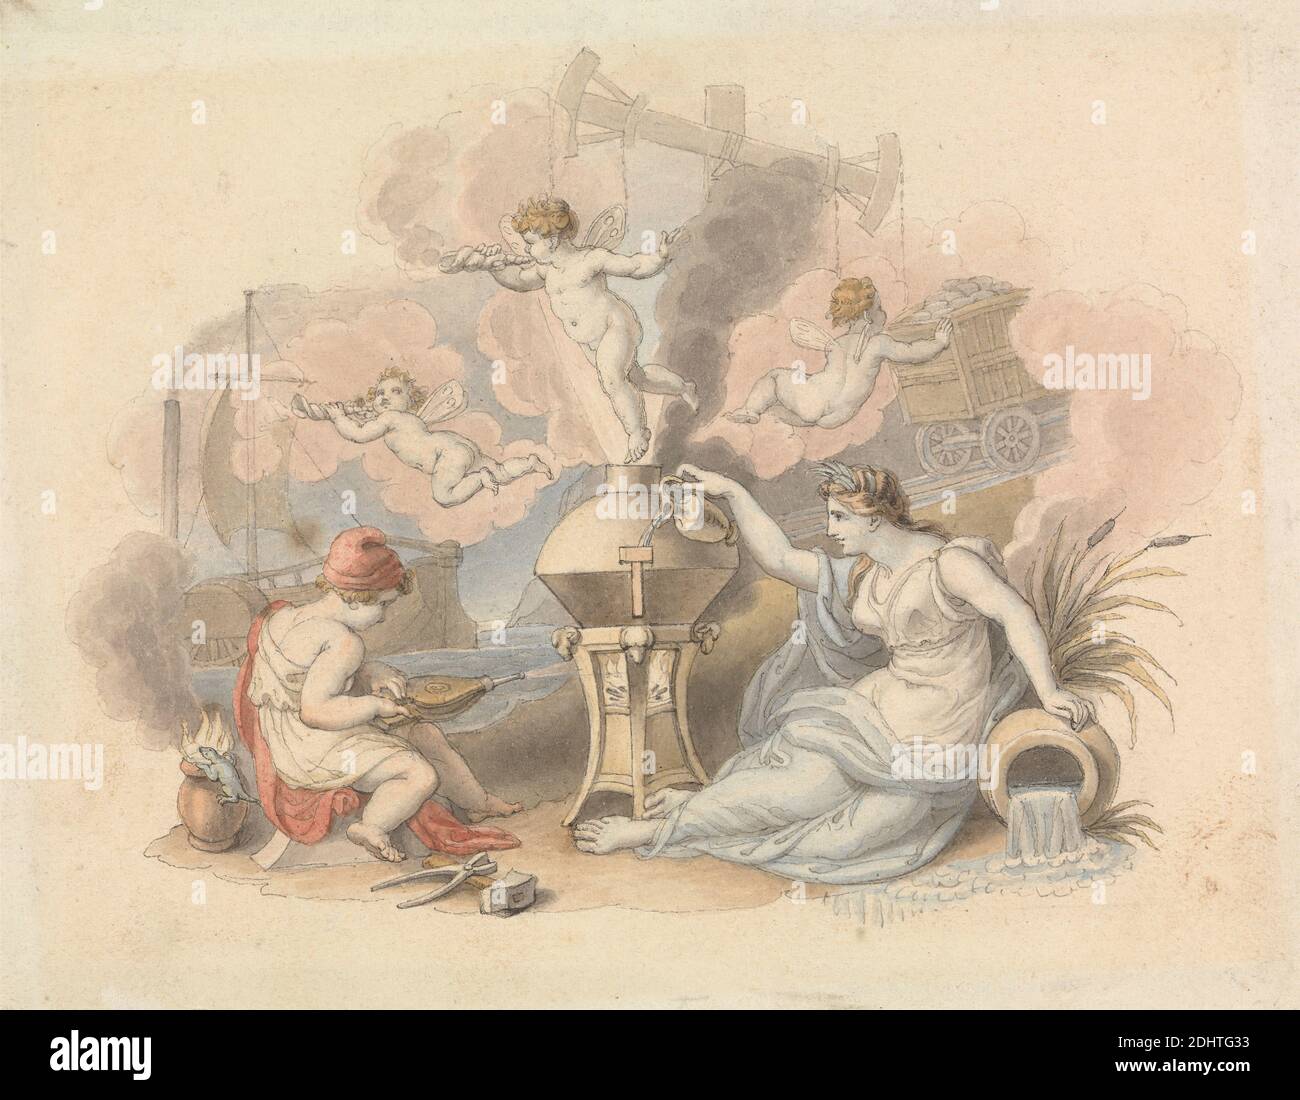 Allegory of Steam, Edward Francis Burney, 1760–1848, British, undated, Watercolor, pen and black ink, and graphite on medium, slightly textured, cream wove paper, Sheet: 3 7/8 x 5in. (9.8 x 12.7cm), allegory, angels, basin, cart, cherubs, coal, ewer, figures (representations), lizard, mallet, religious and mythological subject, shell, ship, steam, wind Stock Photo